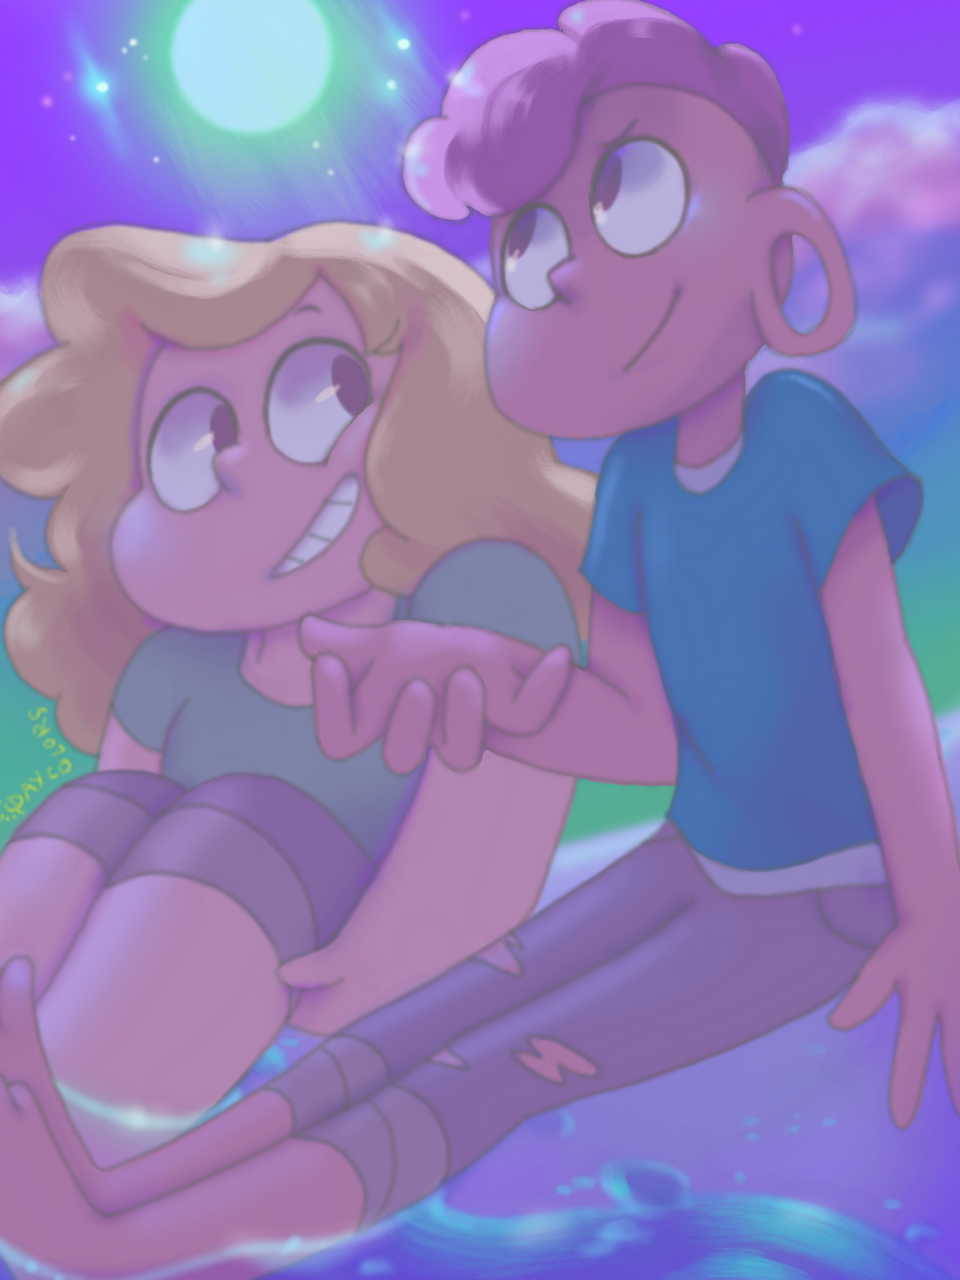 Whoaa I still can’t believe Steven can take over other people and they’re unconscious the whole time, I wonder if he can take over gems too?! But I really hope they get to talk to each other sometime!